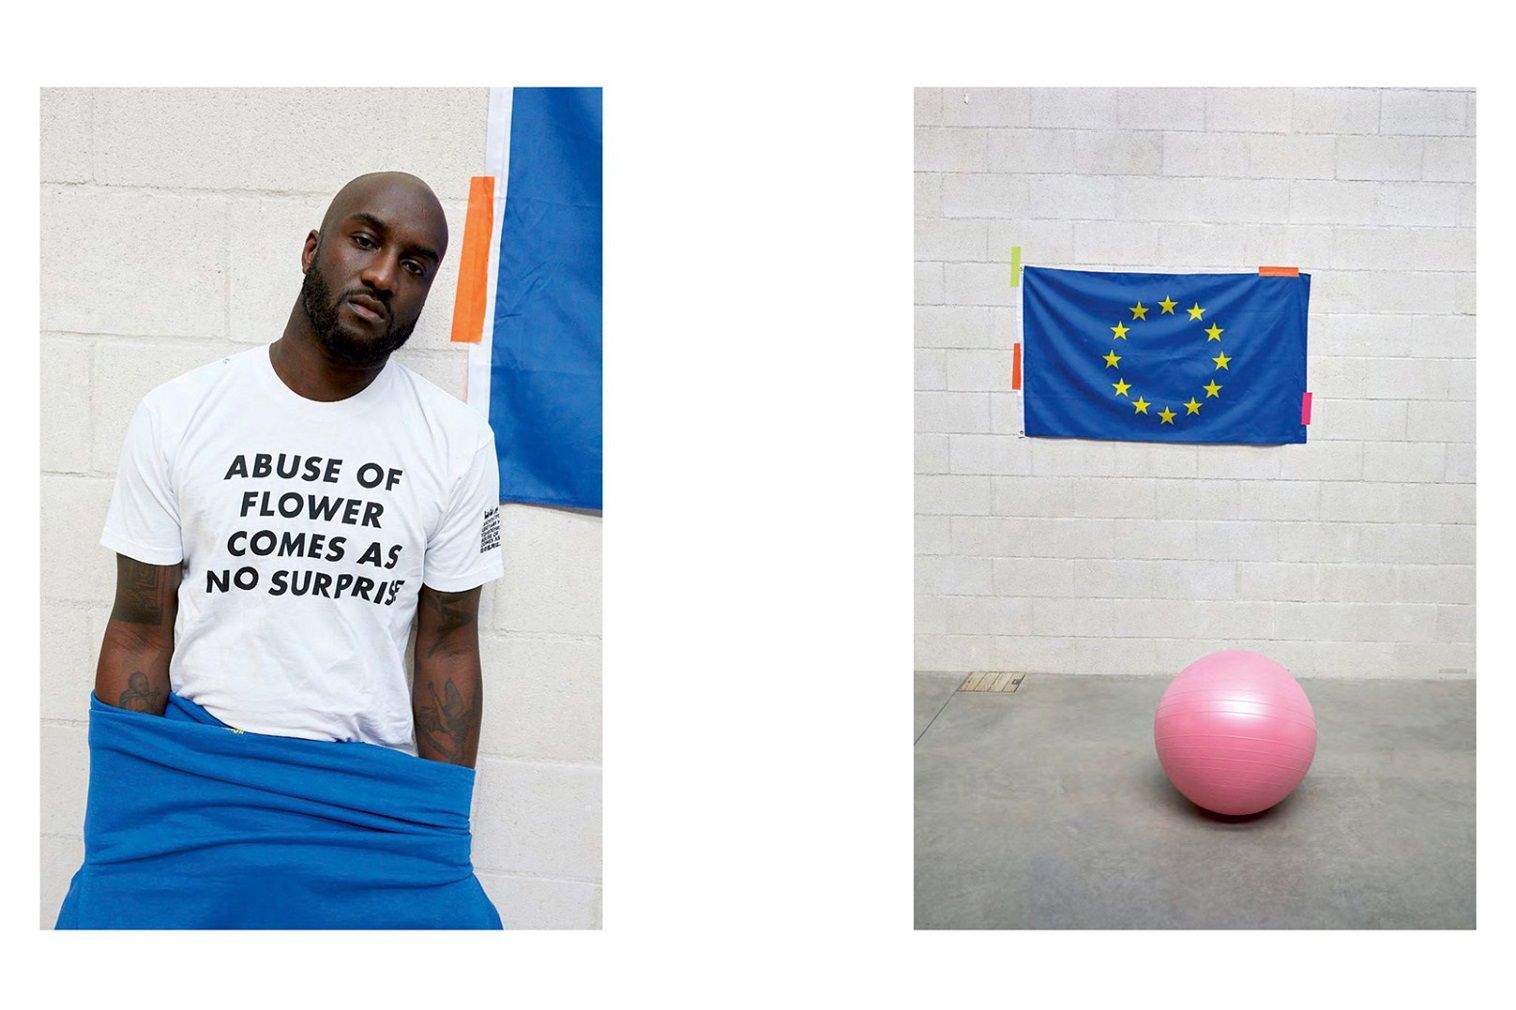 IKEA collaborates with Virgil Abloh for pre-launch – IKEA Global